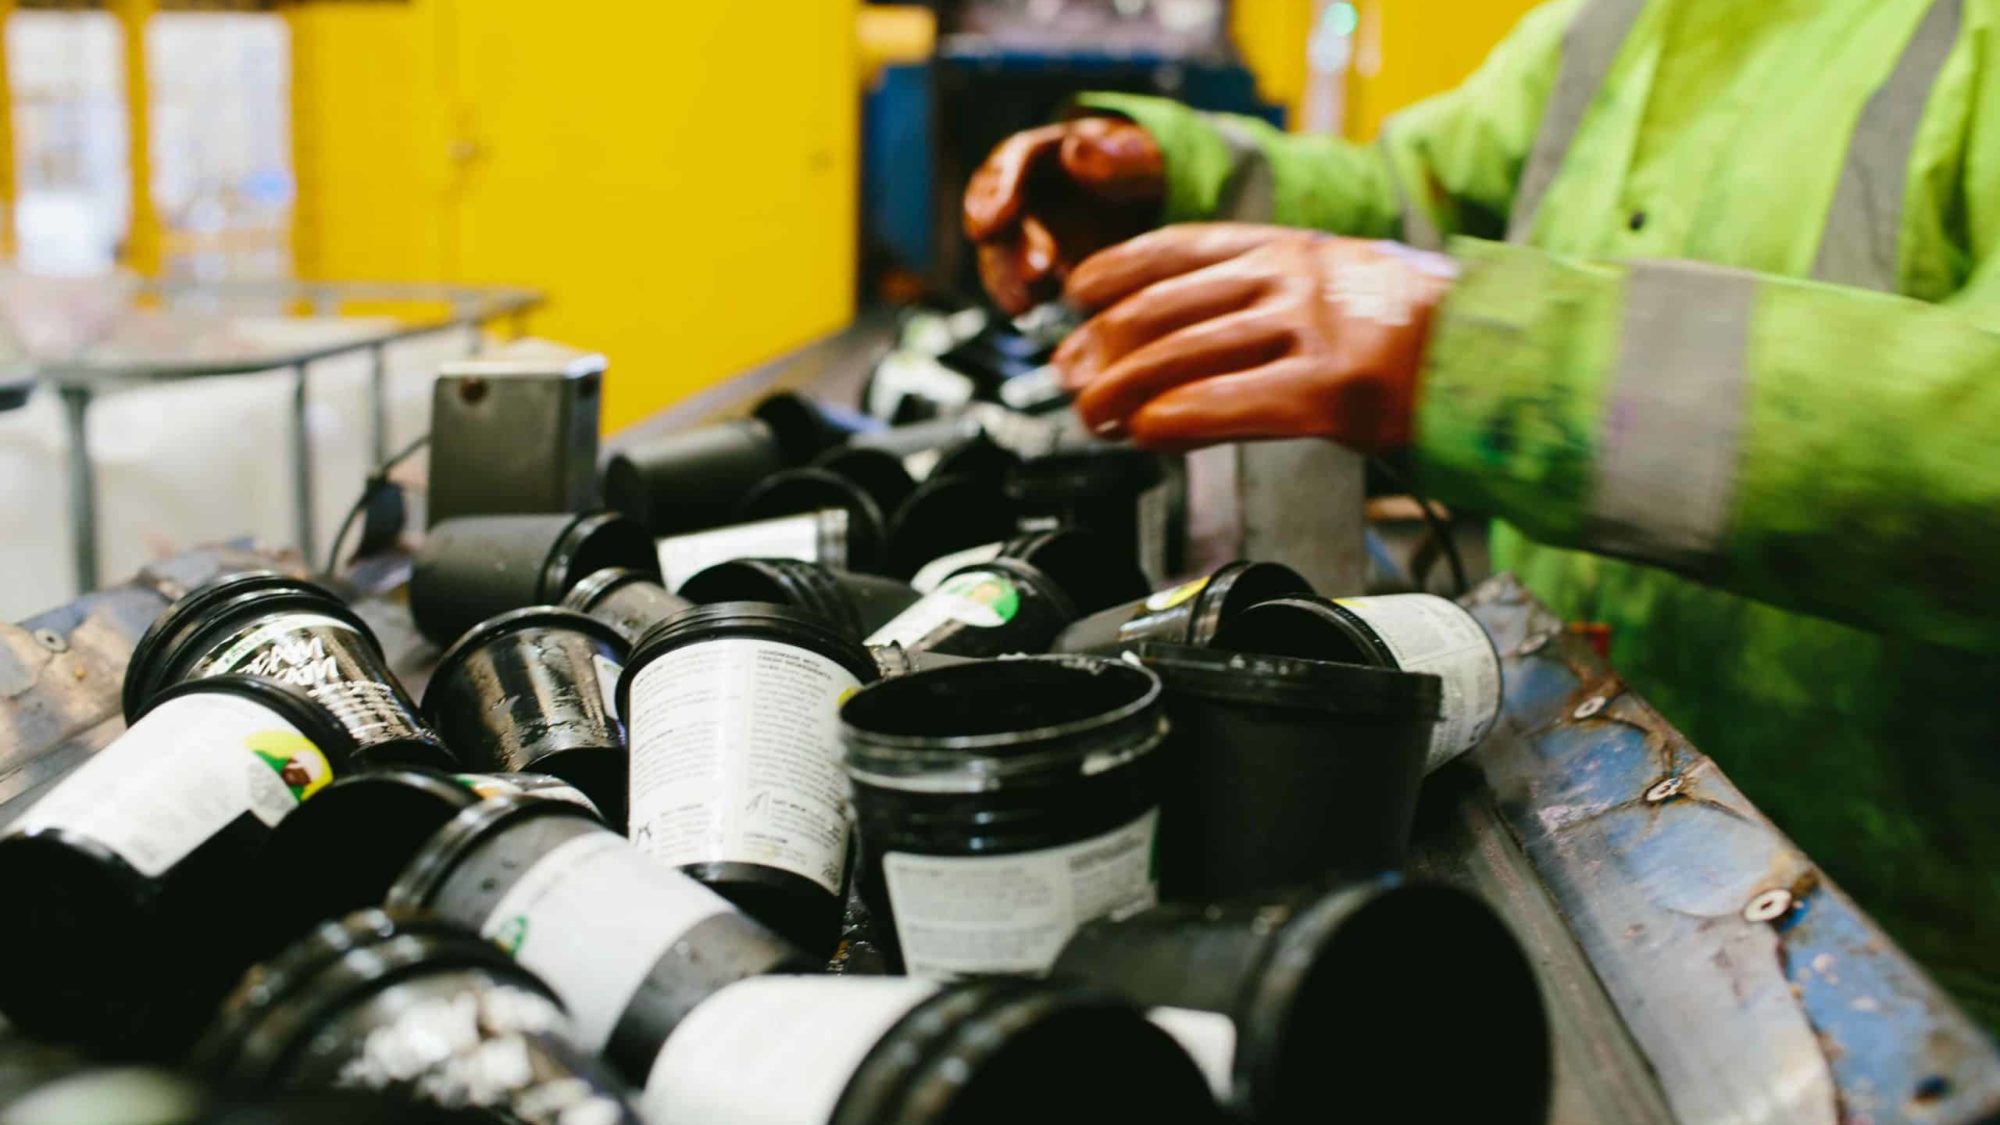 Lush takes on warehouse for recycling operation